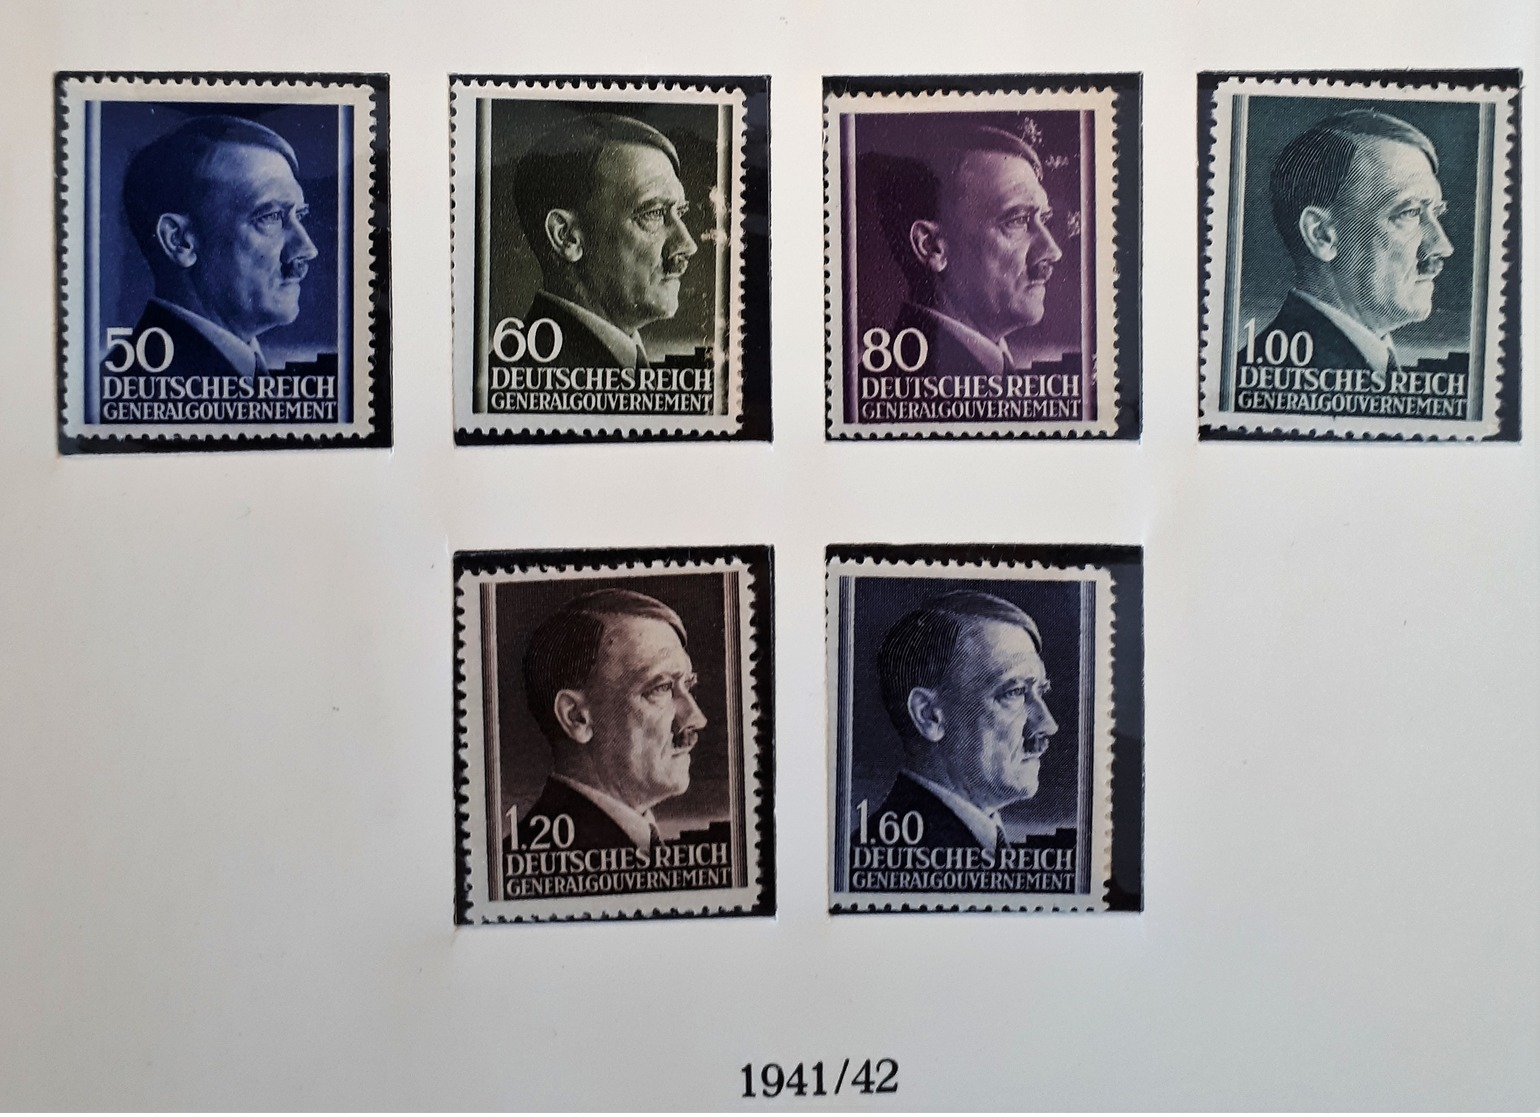 Poland - Occupation Stamps 1940/42 (General Gouvernement) - Gobierno General